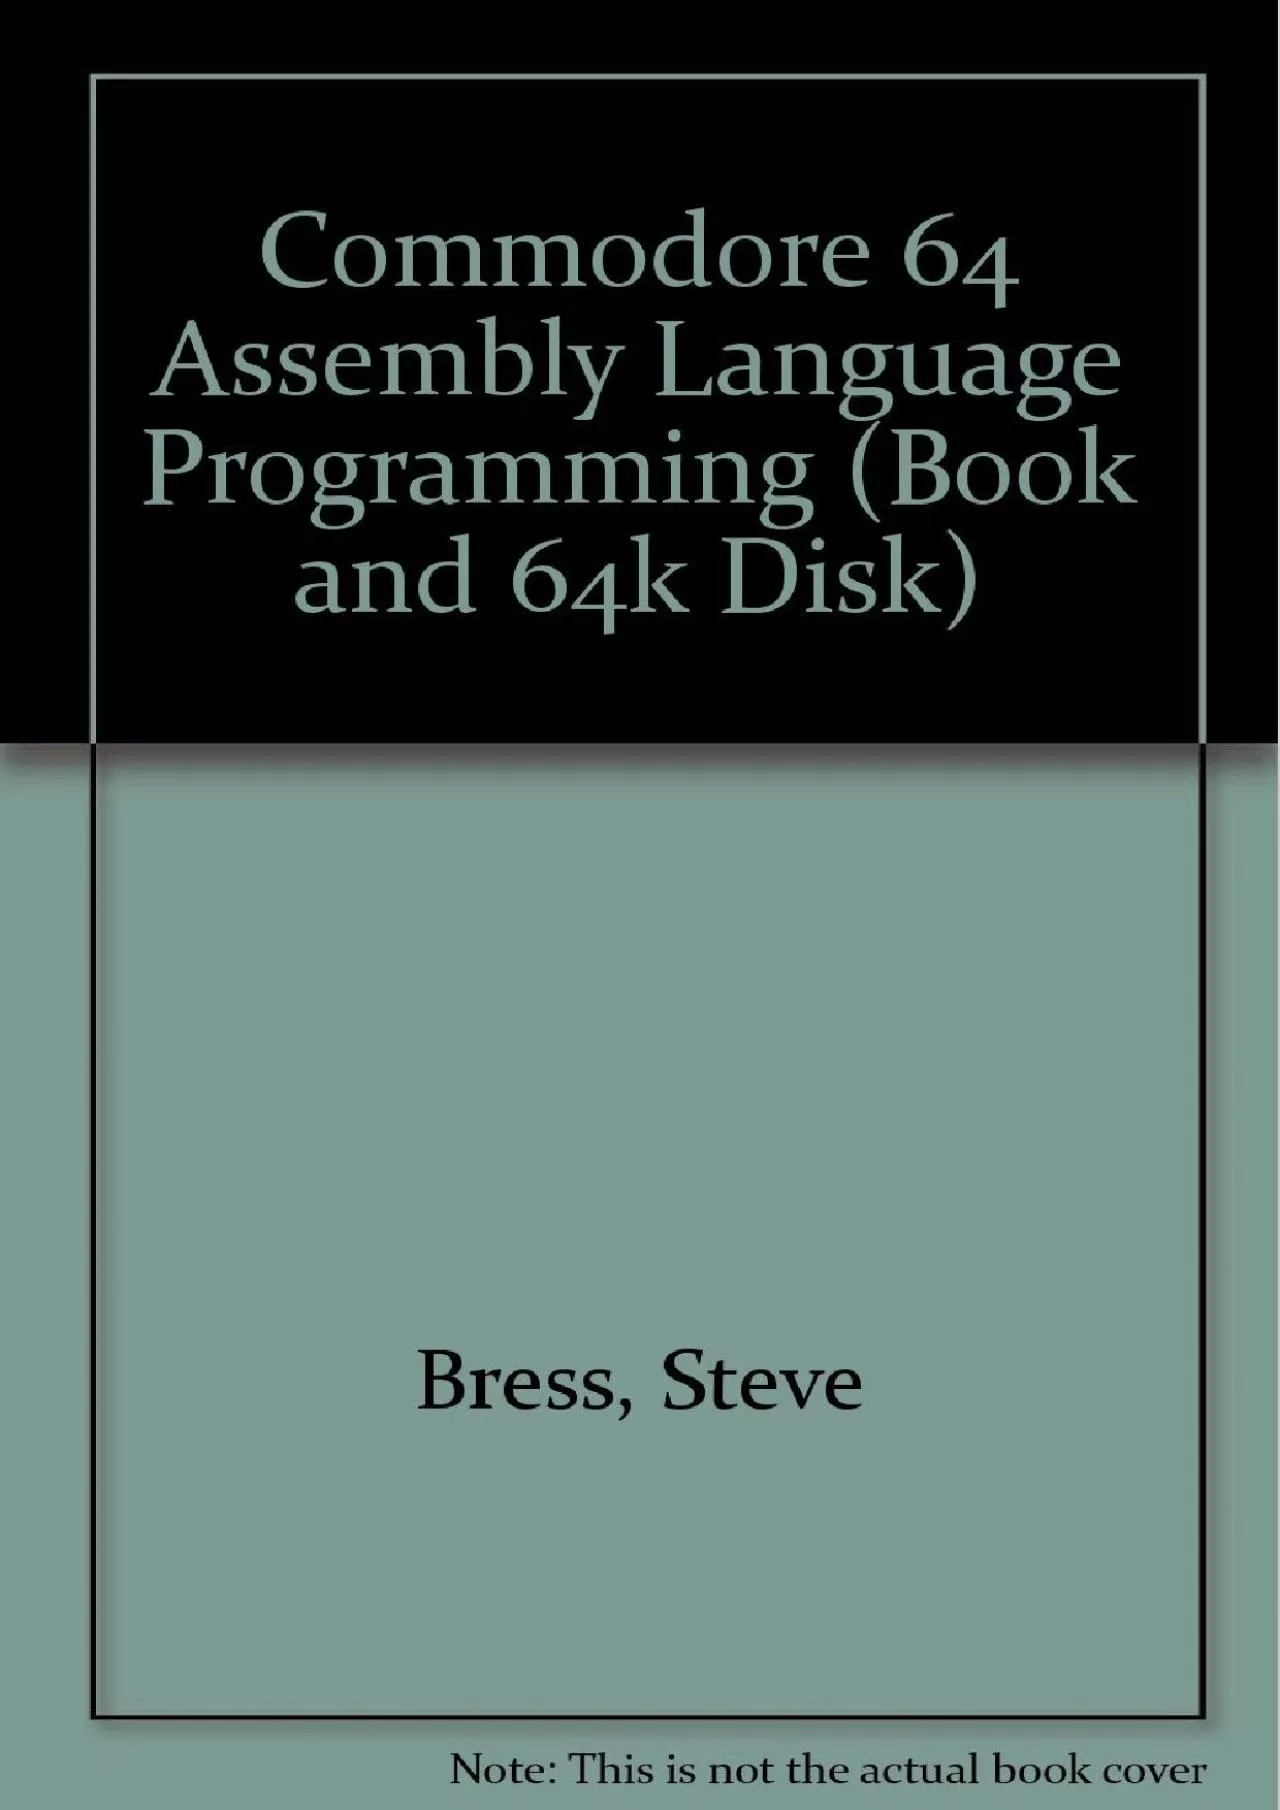 [BEST]-Commodore 64 Assembly Language Programming (Book and 64K Disk)